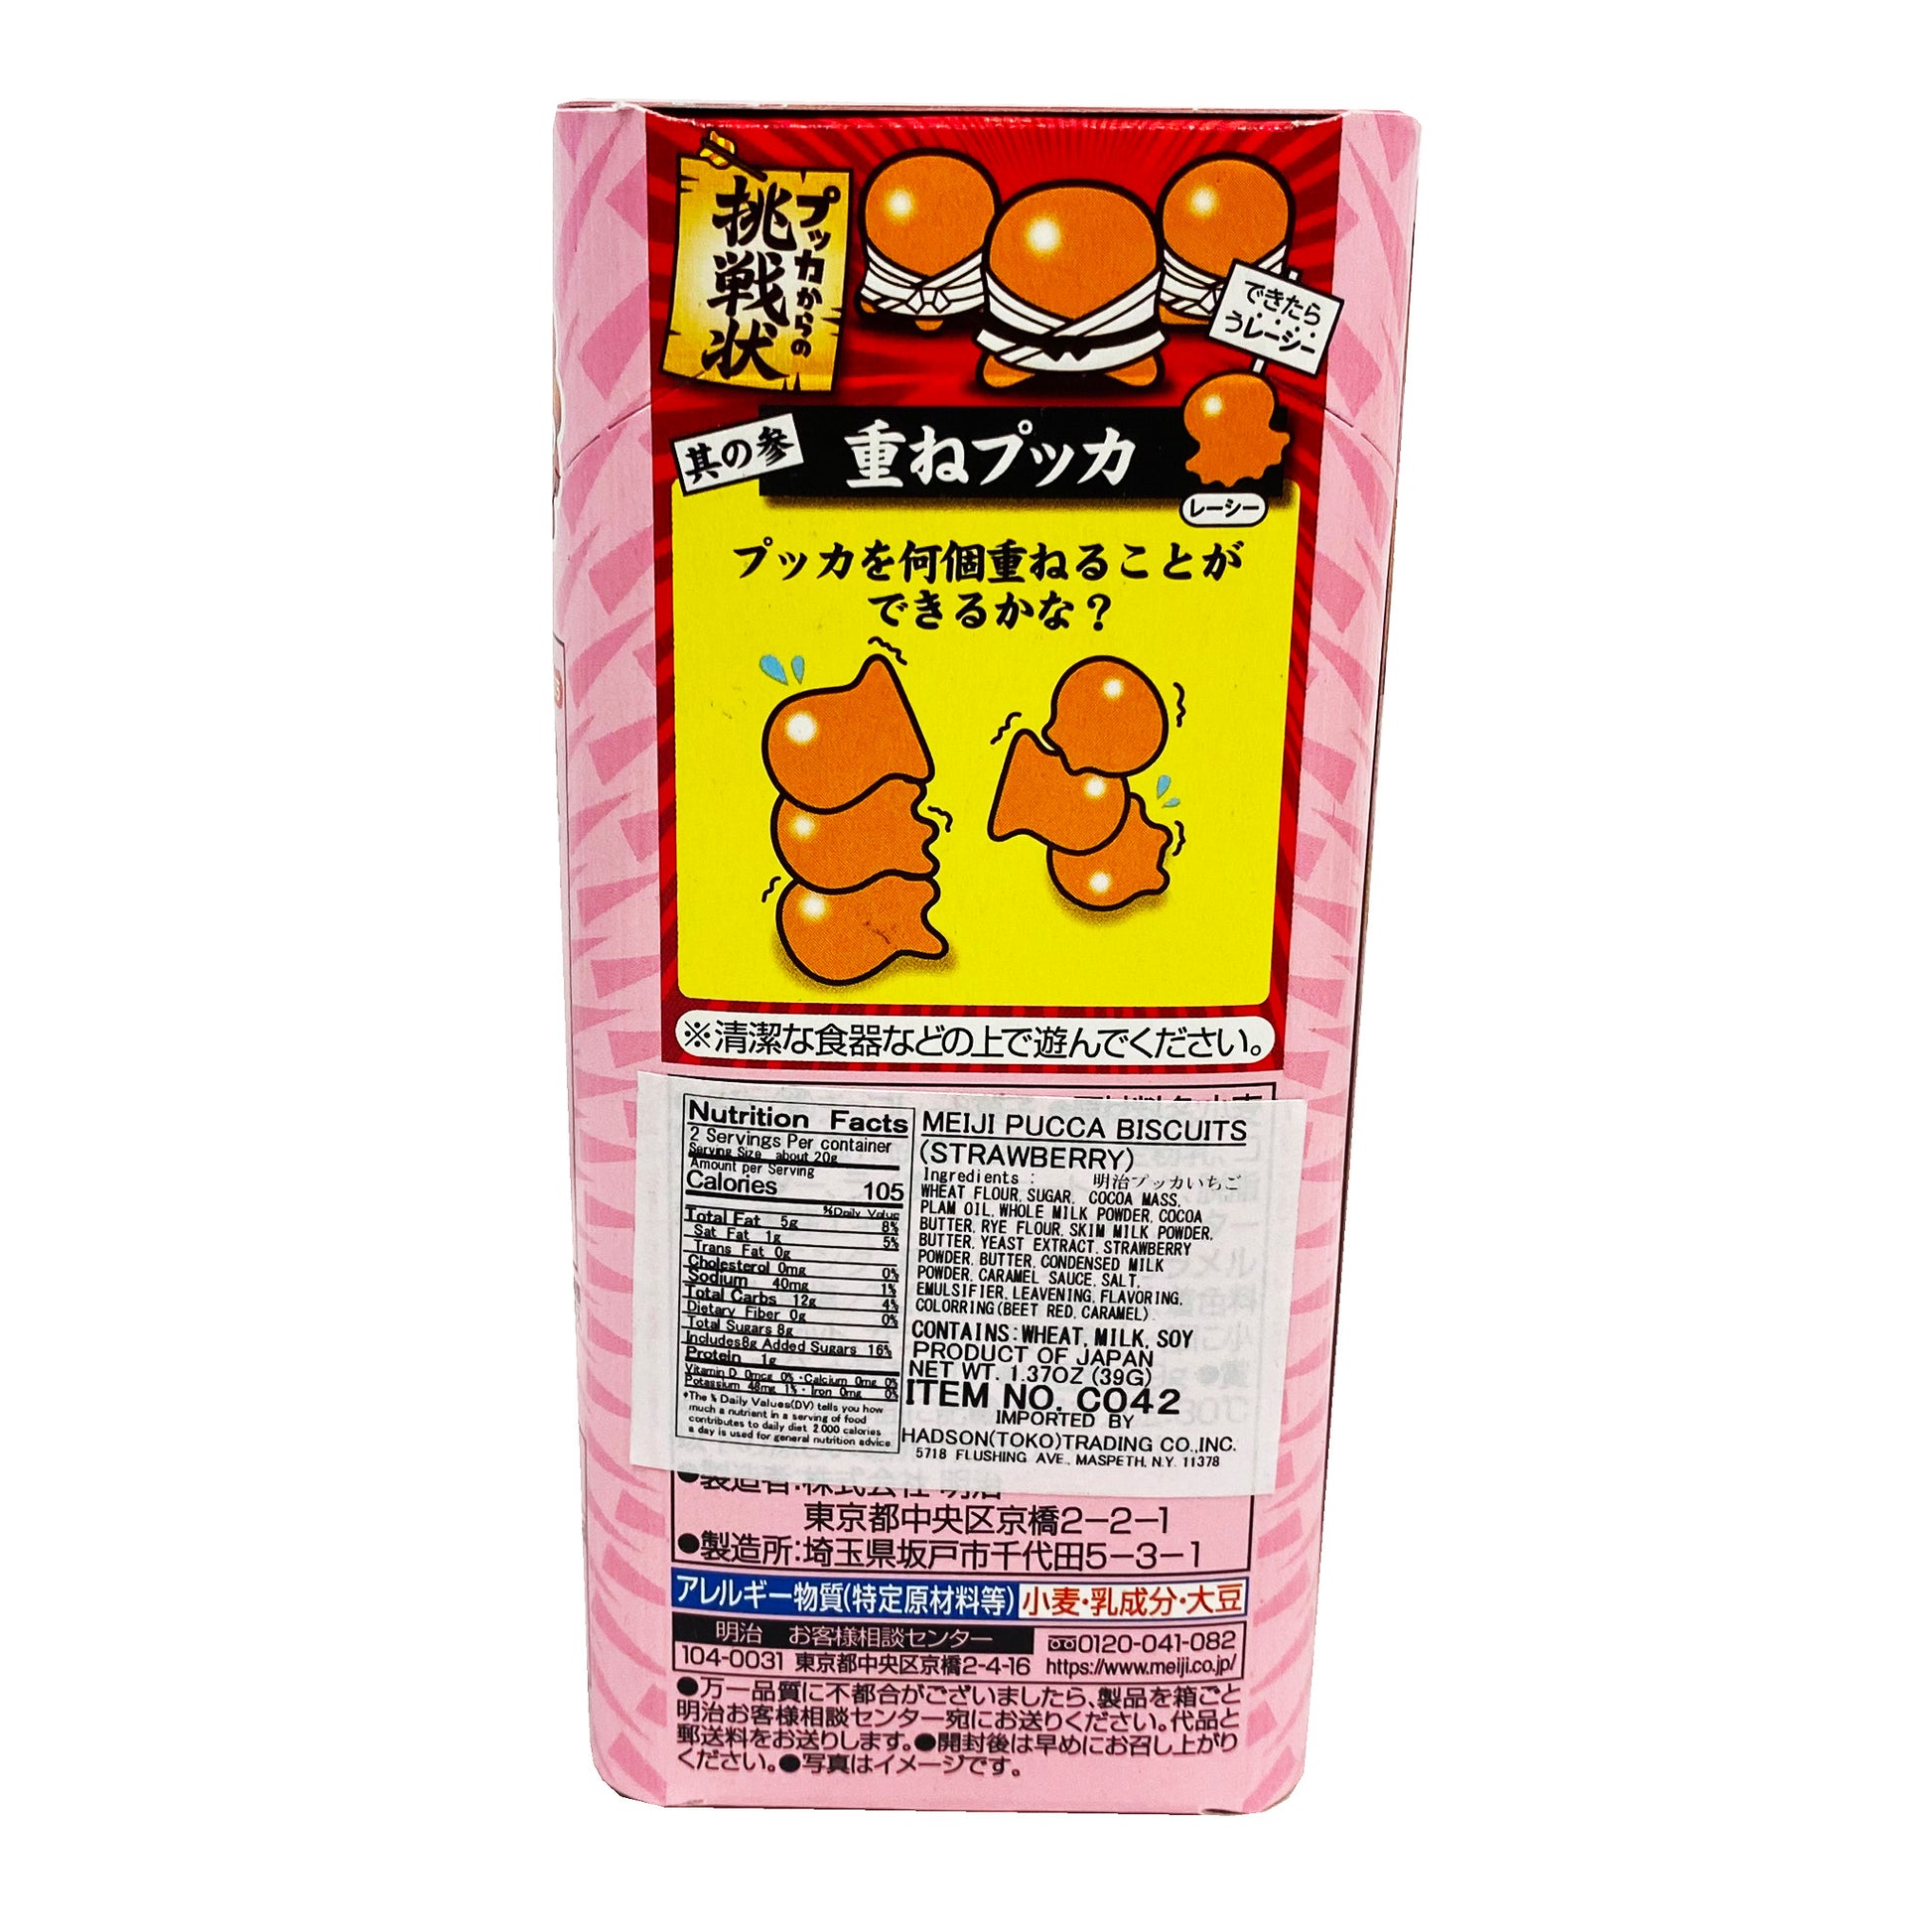 Back graphic image of Meiji Pucca Biscuits - Strawberry Flavor 1.37oz (39g)